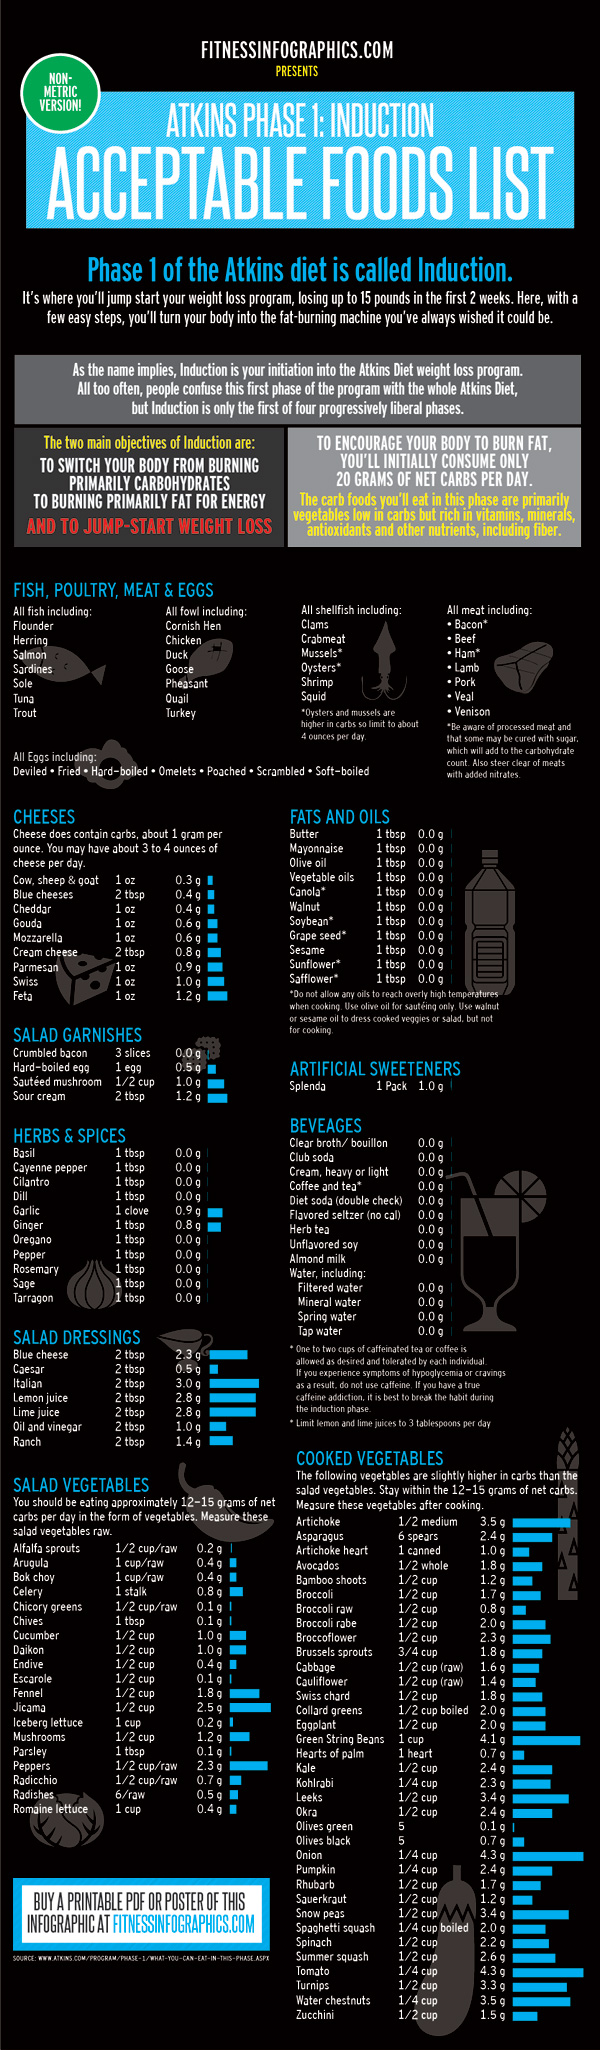 fitness infographics » diets: atkins acceptable foods non-metric version